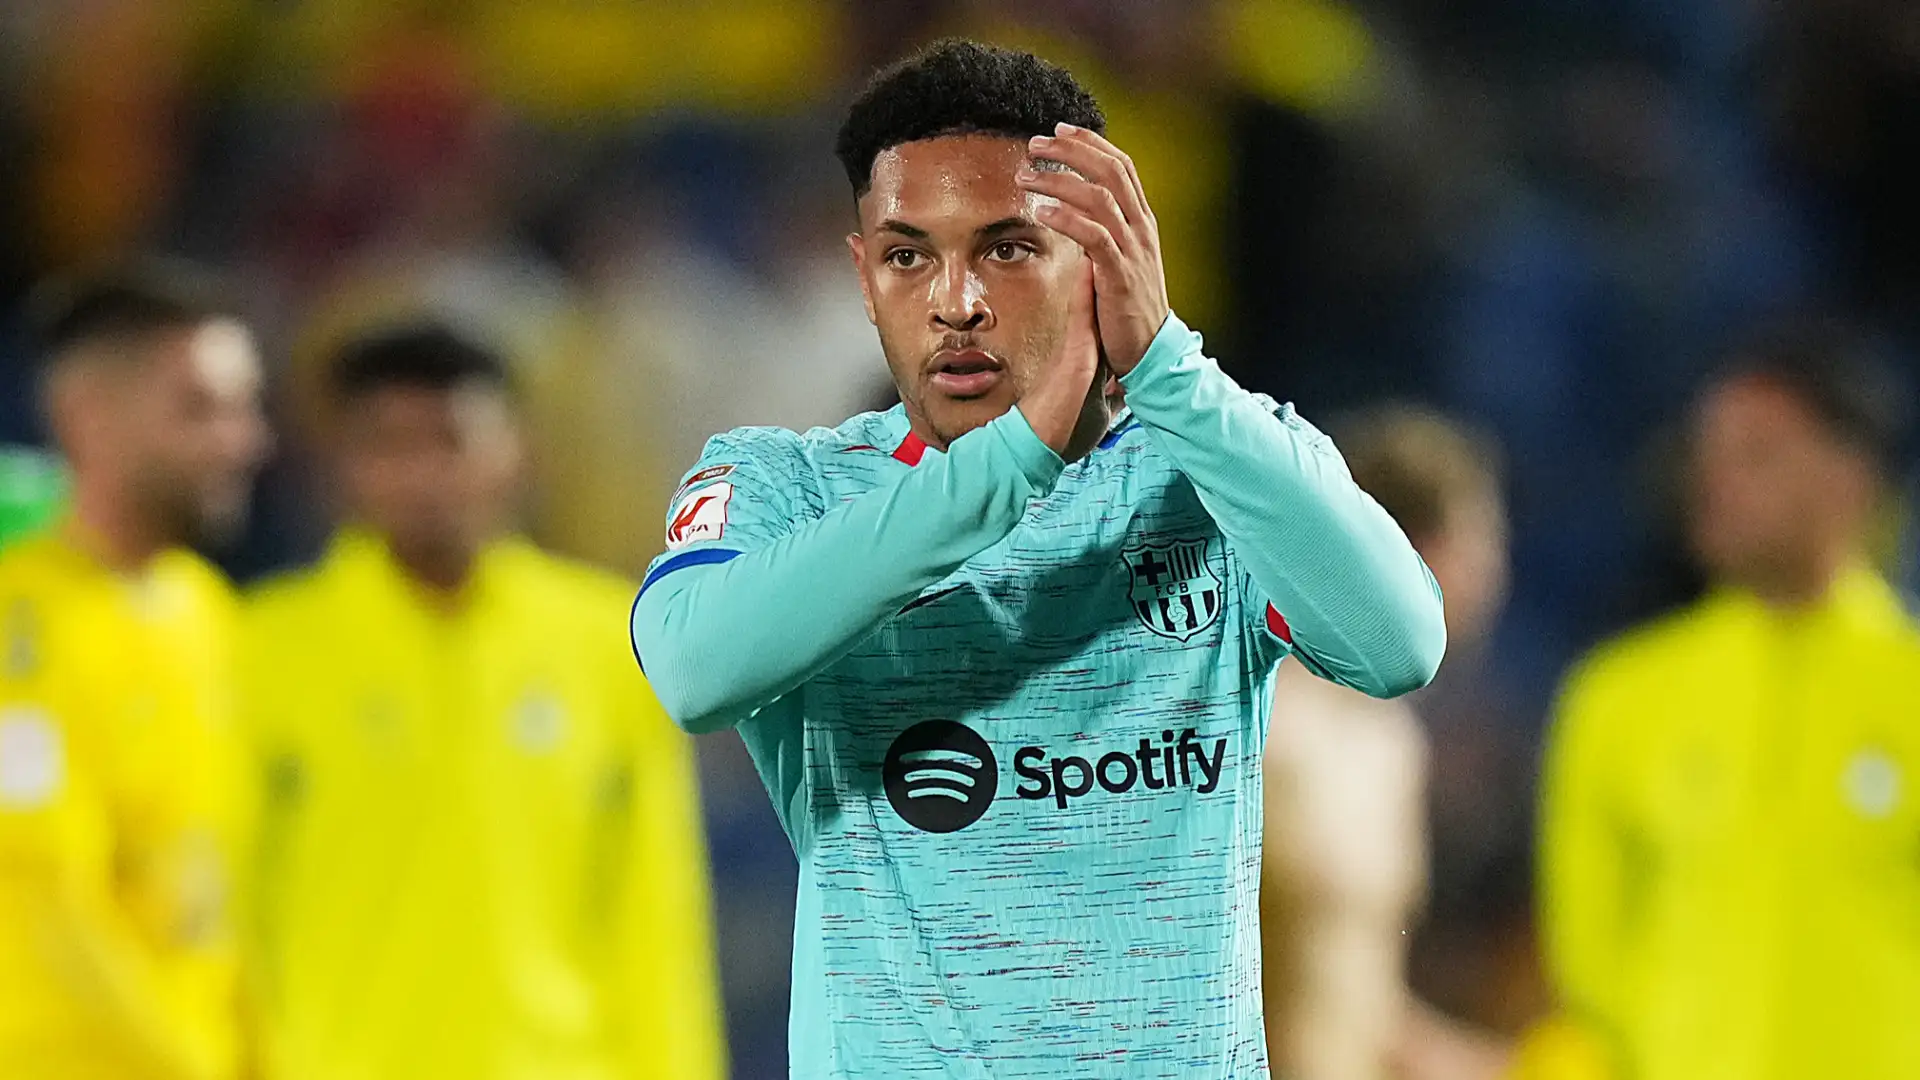 Vitor Roque set to leave Barcelona! Out-of-favour striker primed for exit after just four months - and youngster doesn't want to be loaned out